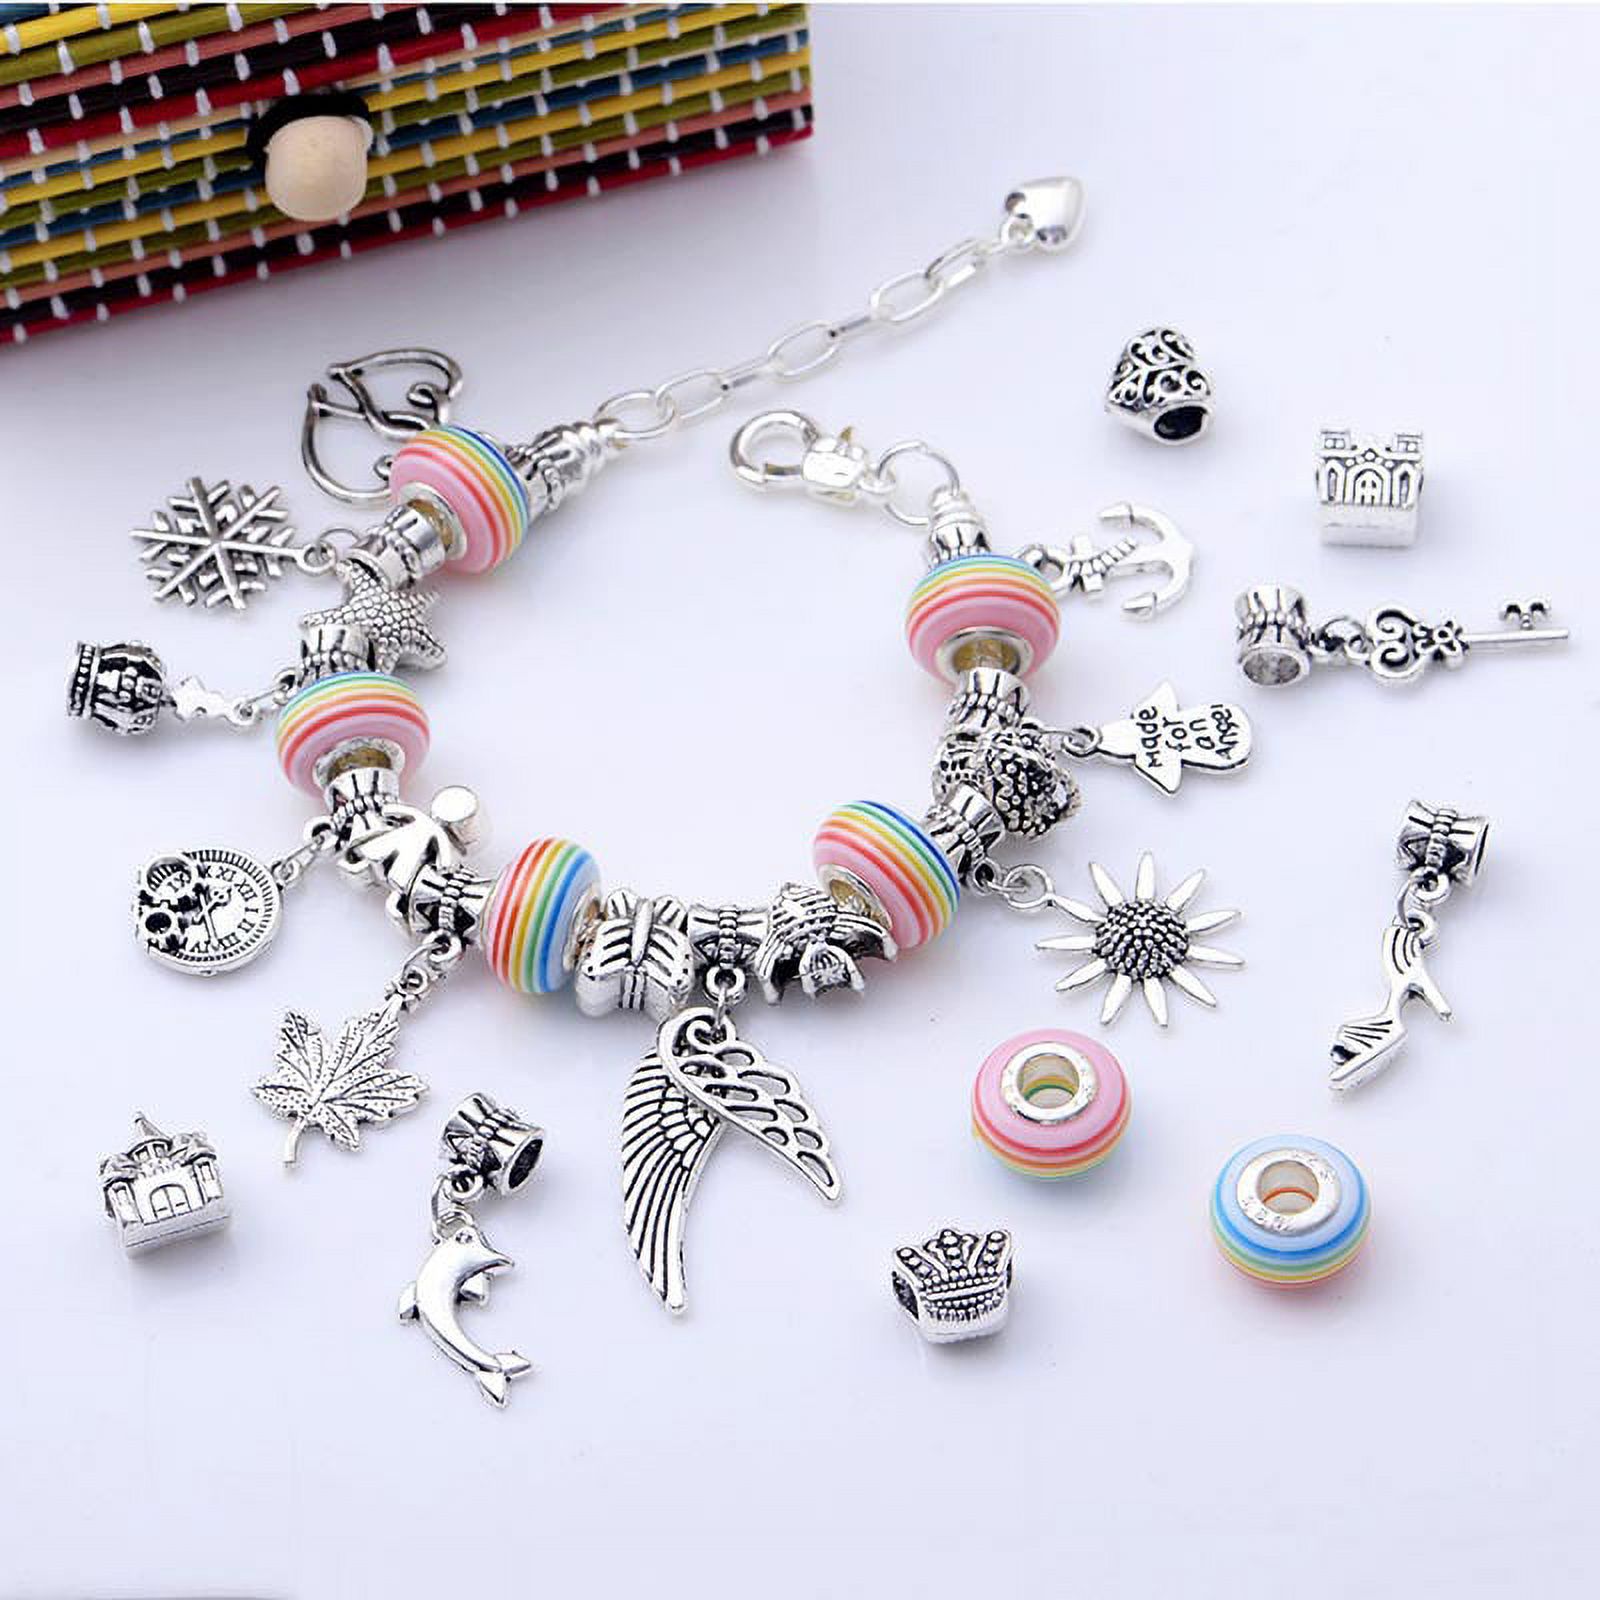 Charm Bracelet Making Kit for Girls, Kids' Jewelry Making Kits Jewelry Making Charms Bracelet Making Set with Bracelet Beads, Jewelry Charms and DIY Crafts with Gift Box 93 Pieces - image 2 of 5